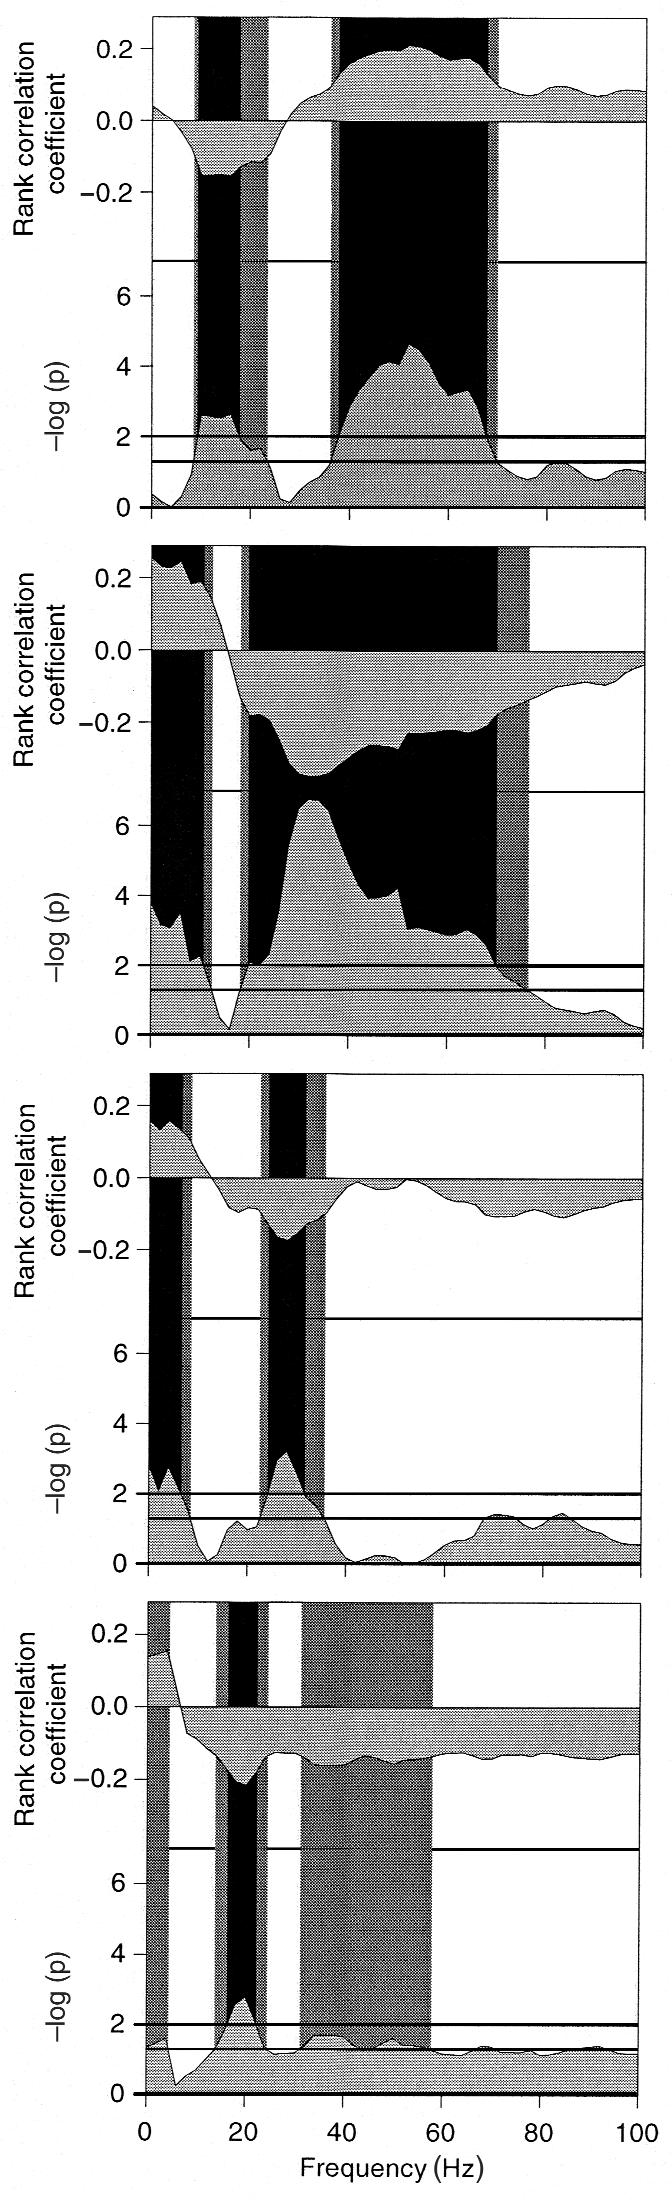 rticles c d Fig. 6. Influence of prestimulus LFP power on ltencies, firing rtes nd their correltions.